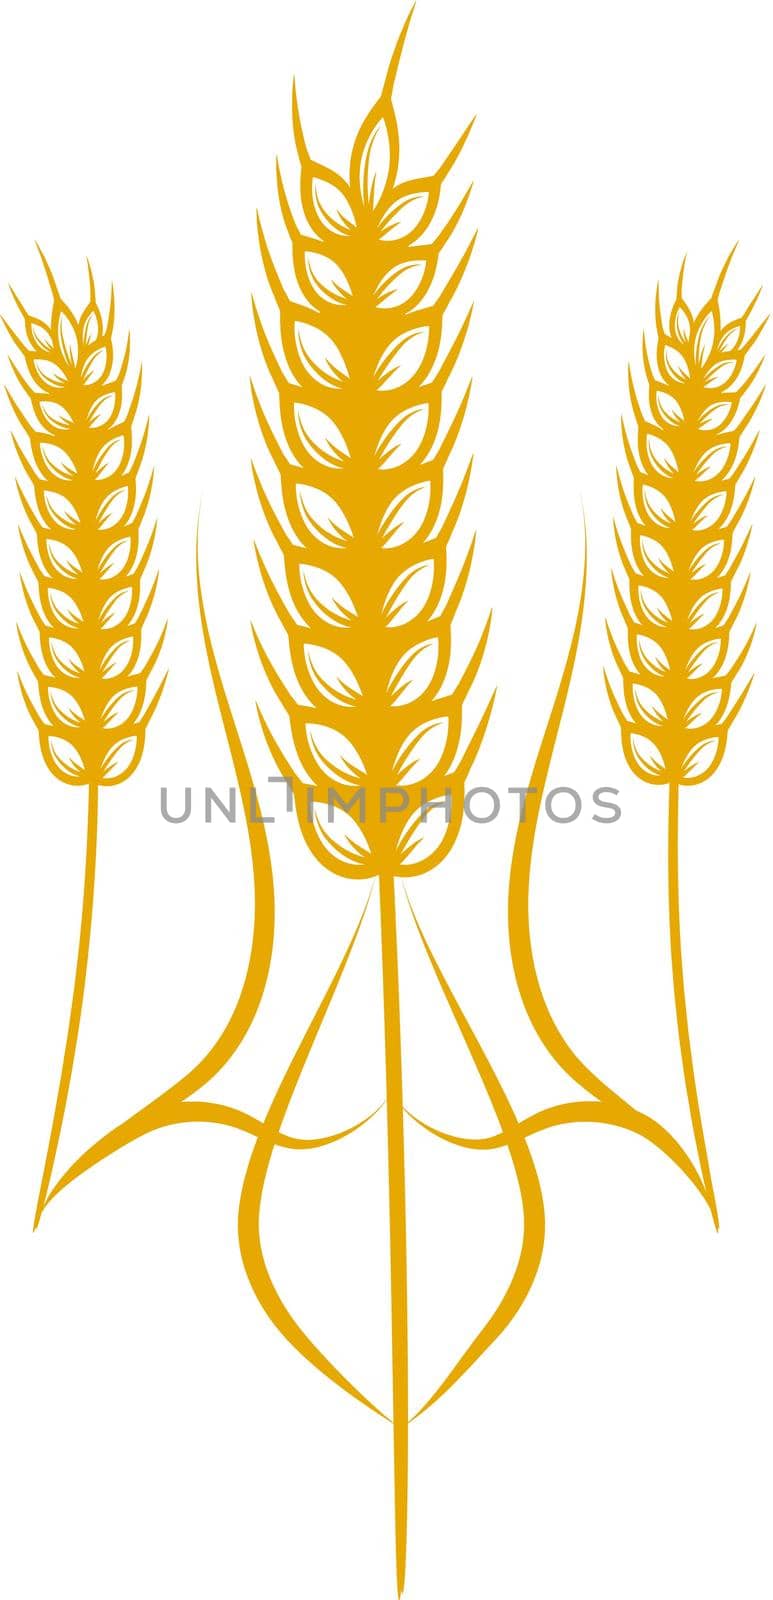 Ukrainian coat of arms. Concept. Logo with ears of wheat.